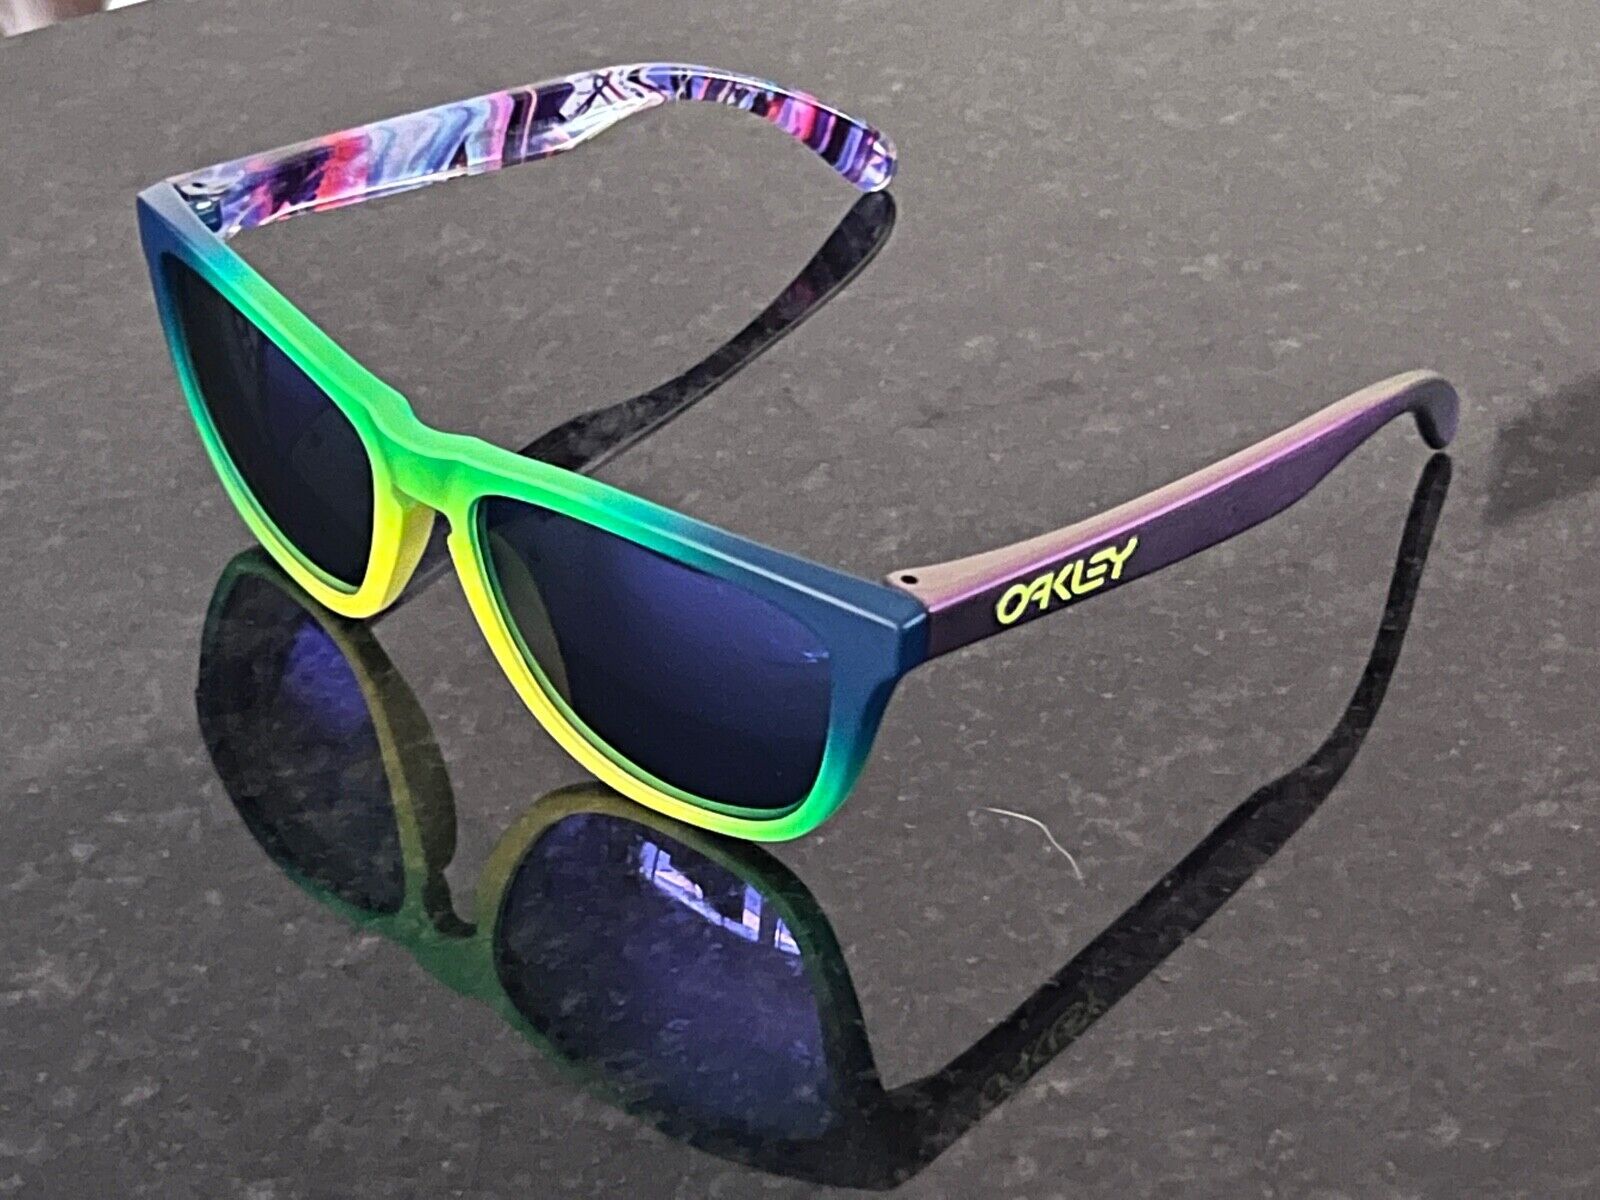 NEW Oakley FROGSKINS PARTS arms- stems- legs | eBay